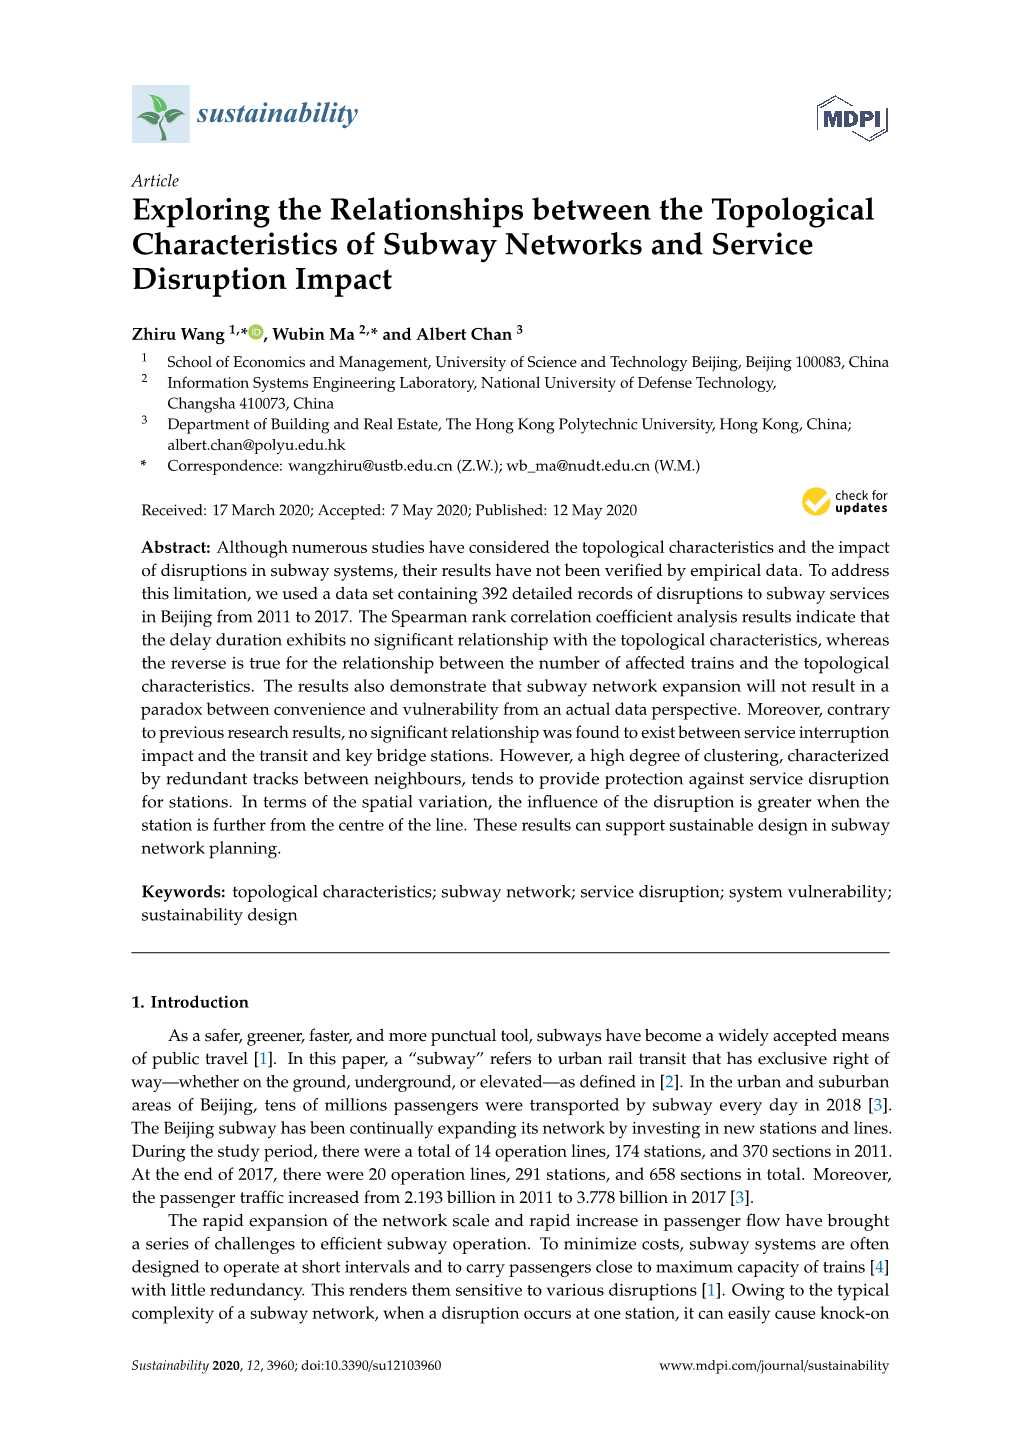 Exploring the Relationships Between the Topological Characteristics of Subway Networks and Service Disruption Impact